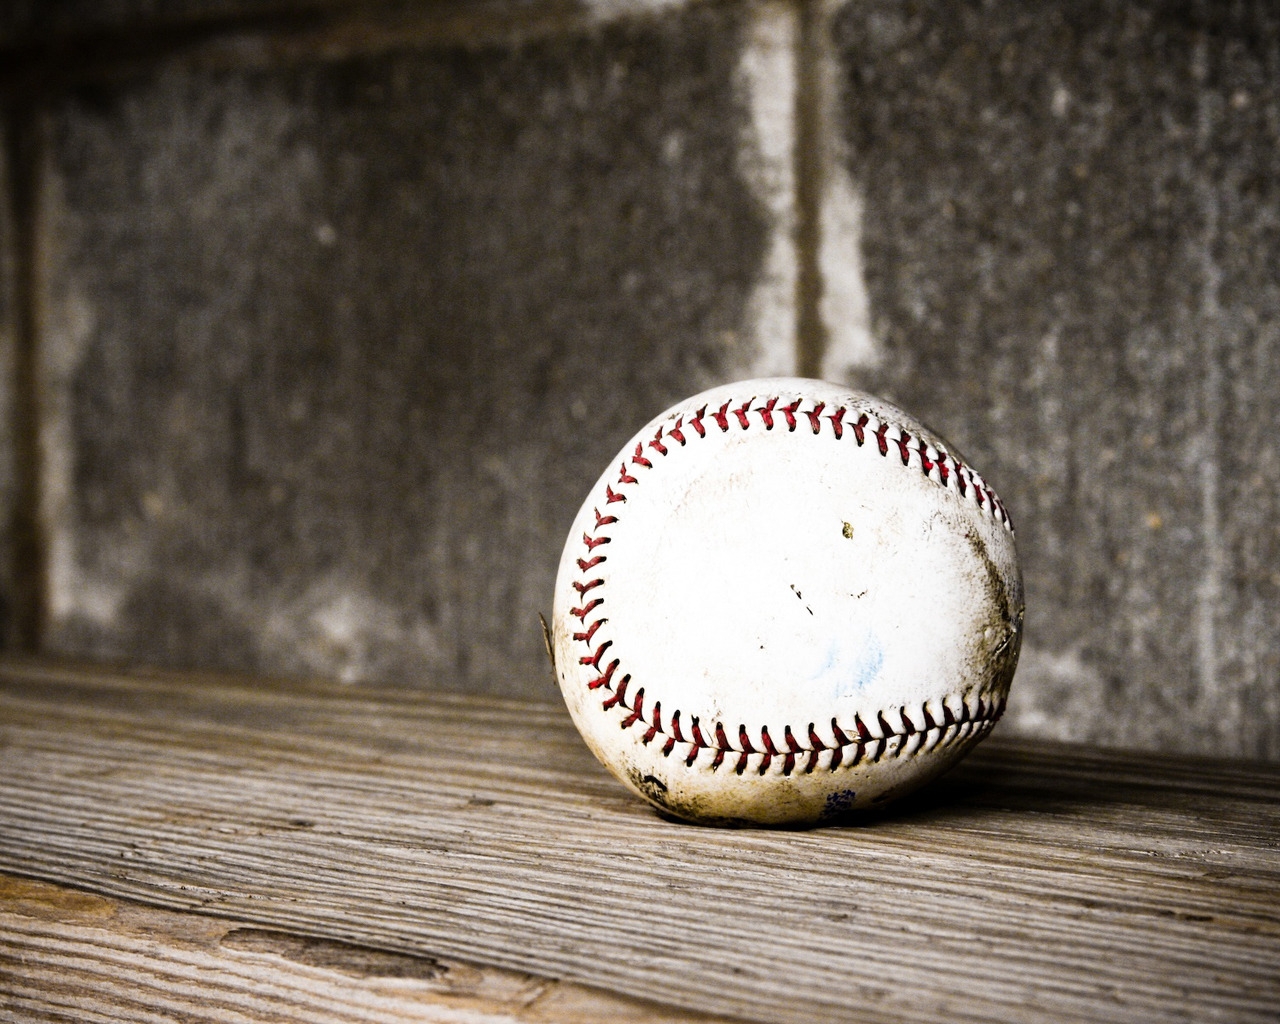 Used Baseball for 1280 x 1024 resolution